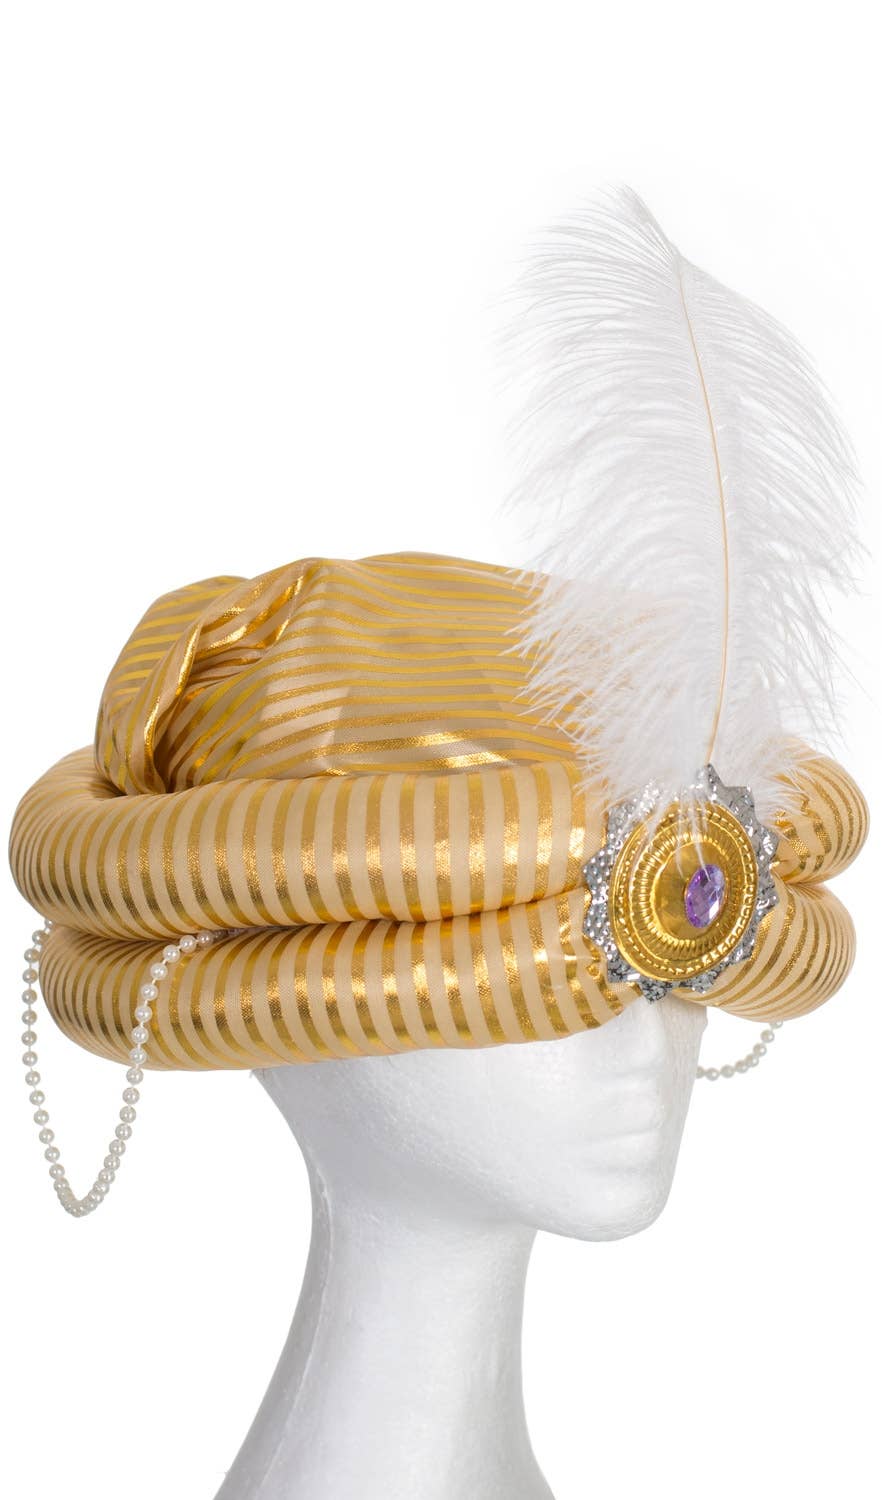 Gold Striped Prince Genie Turban Arabian Costume Hat With White Feather - Main Image